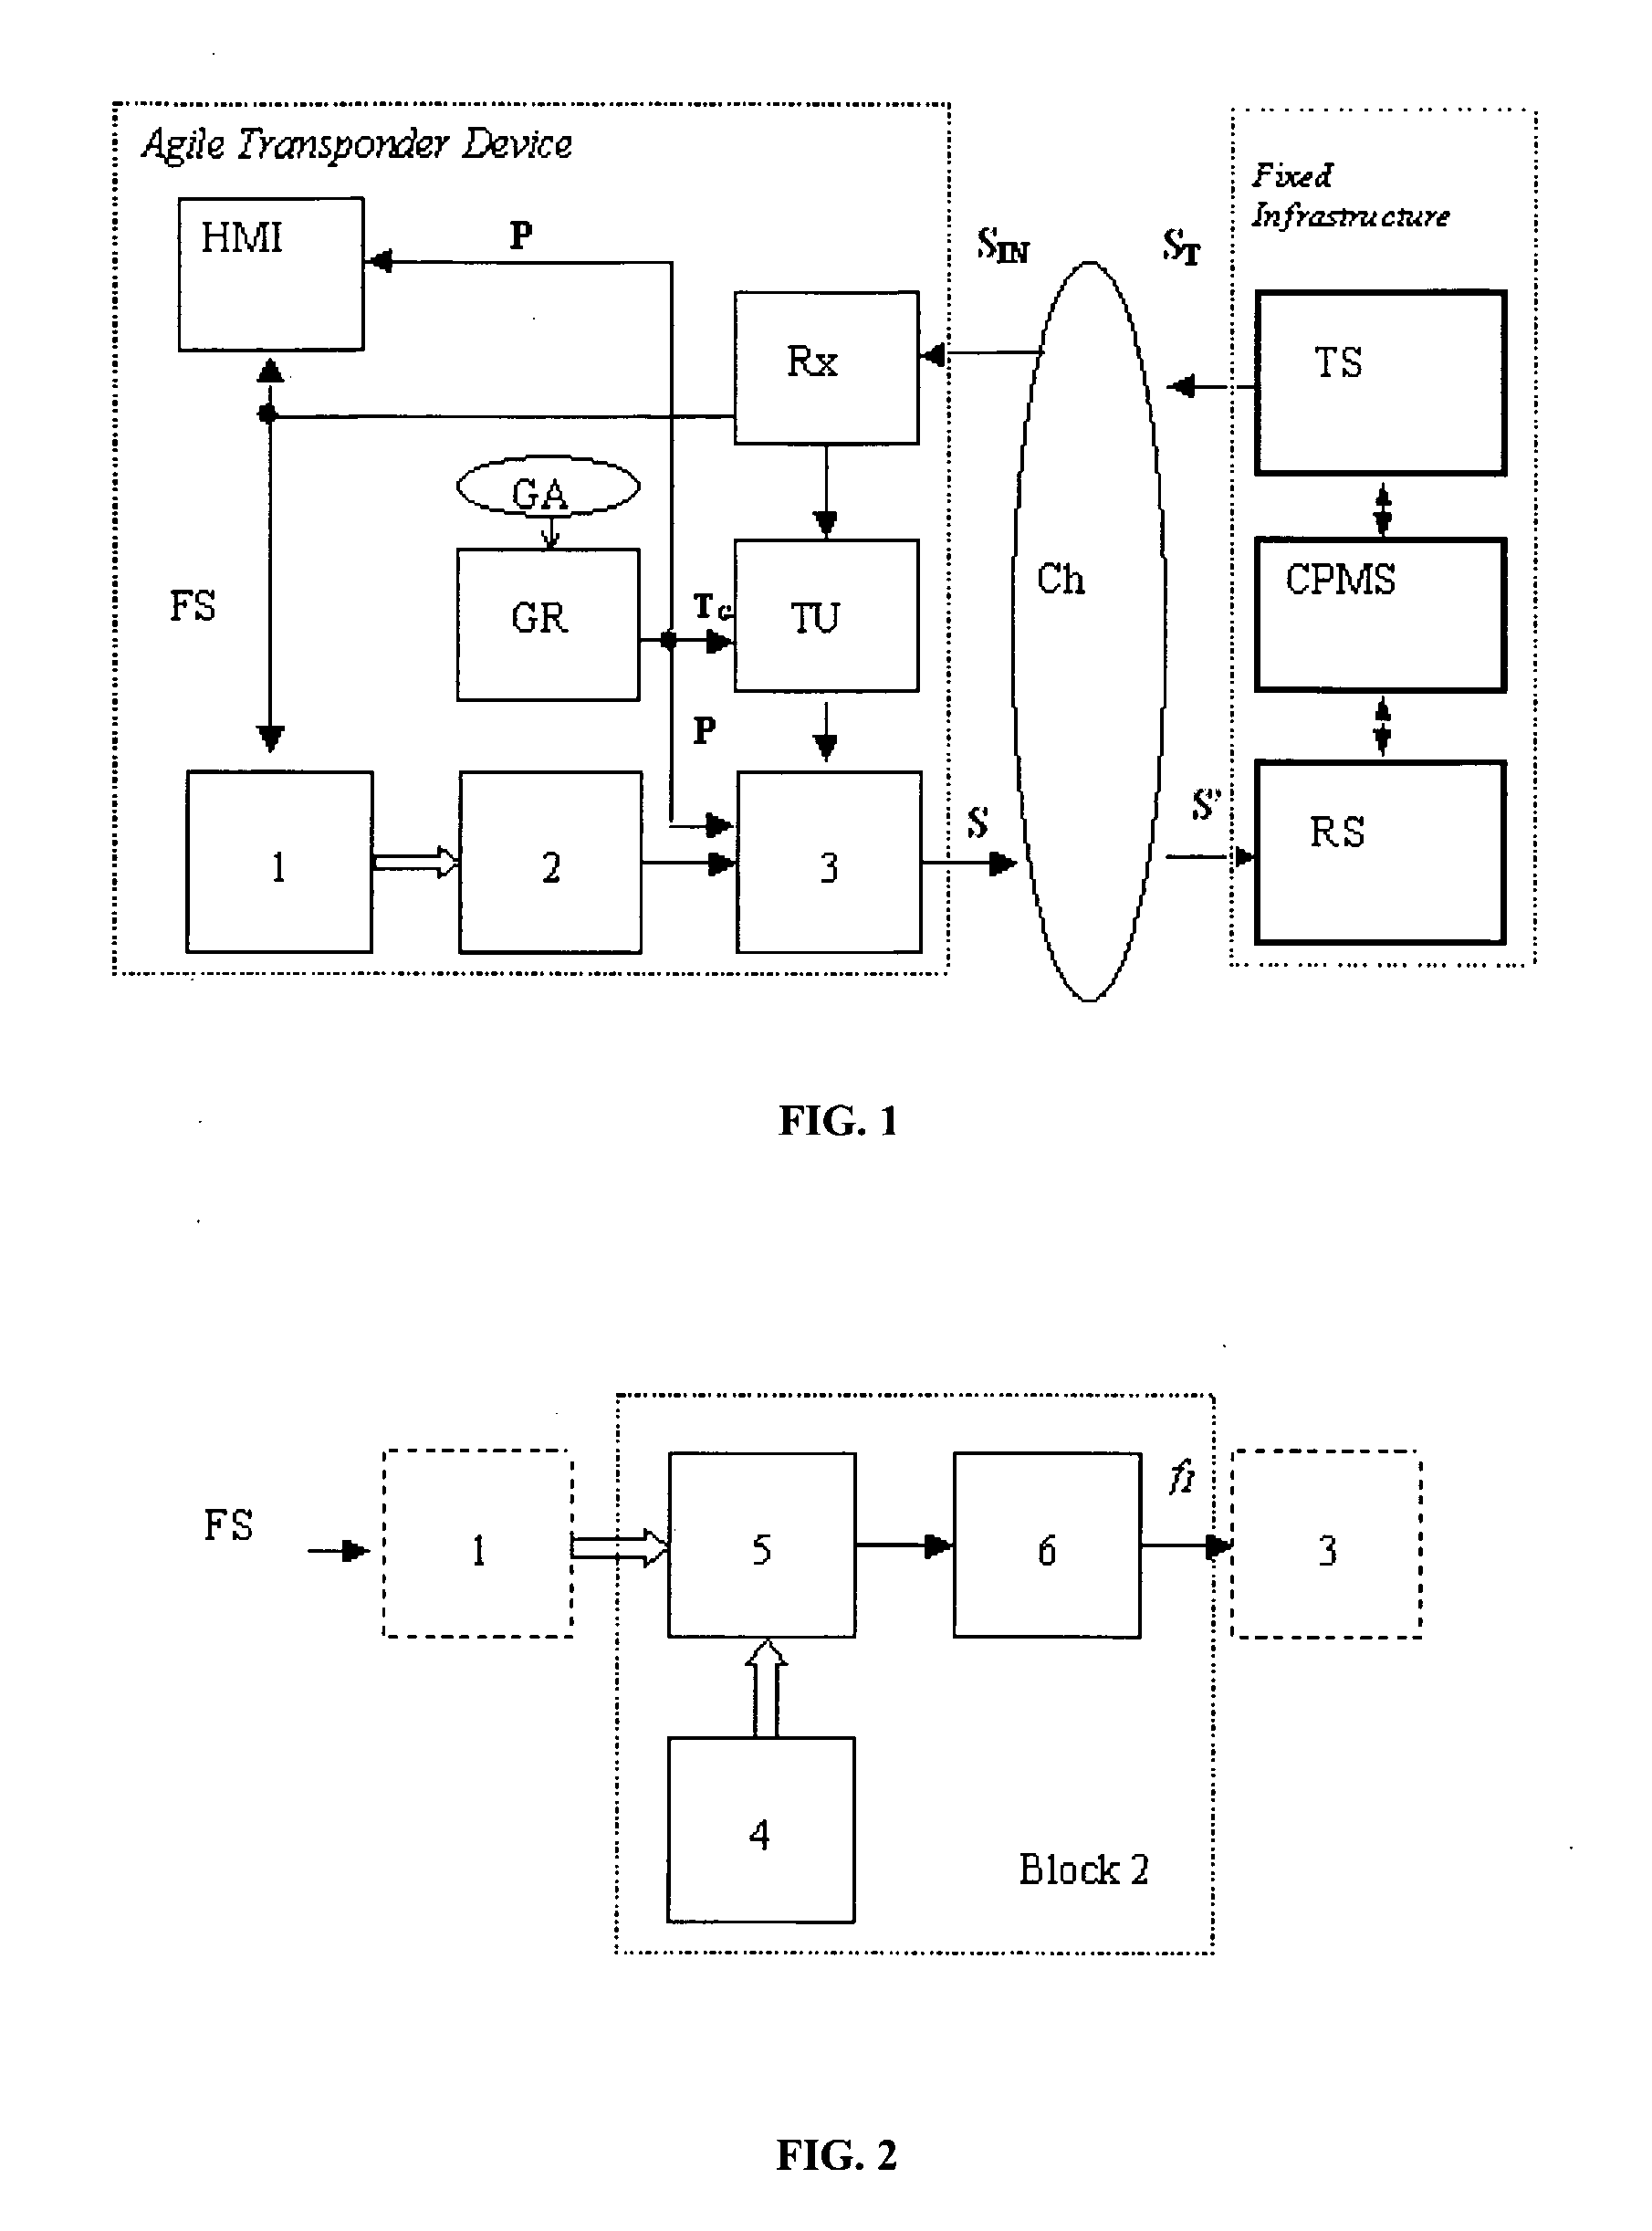 High-Capacity Location and Identification System for Cooperating Mobiles With Frequency Agile and Time Division Transponder Device on Board